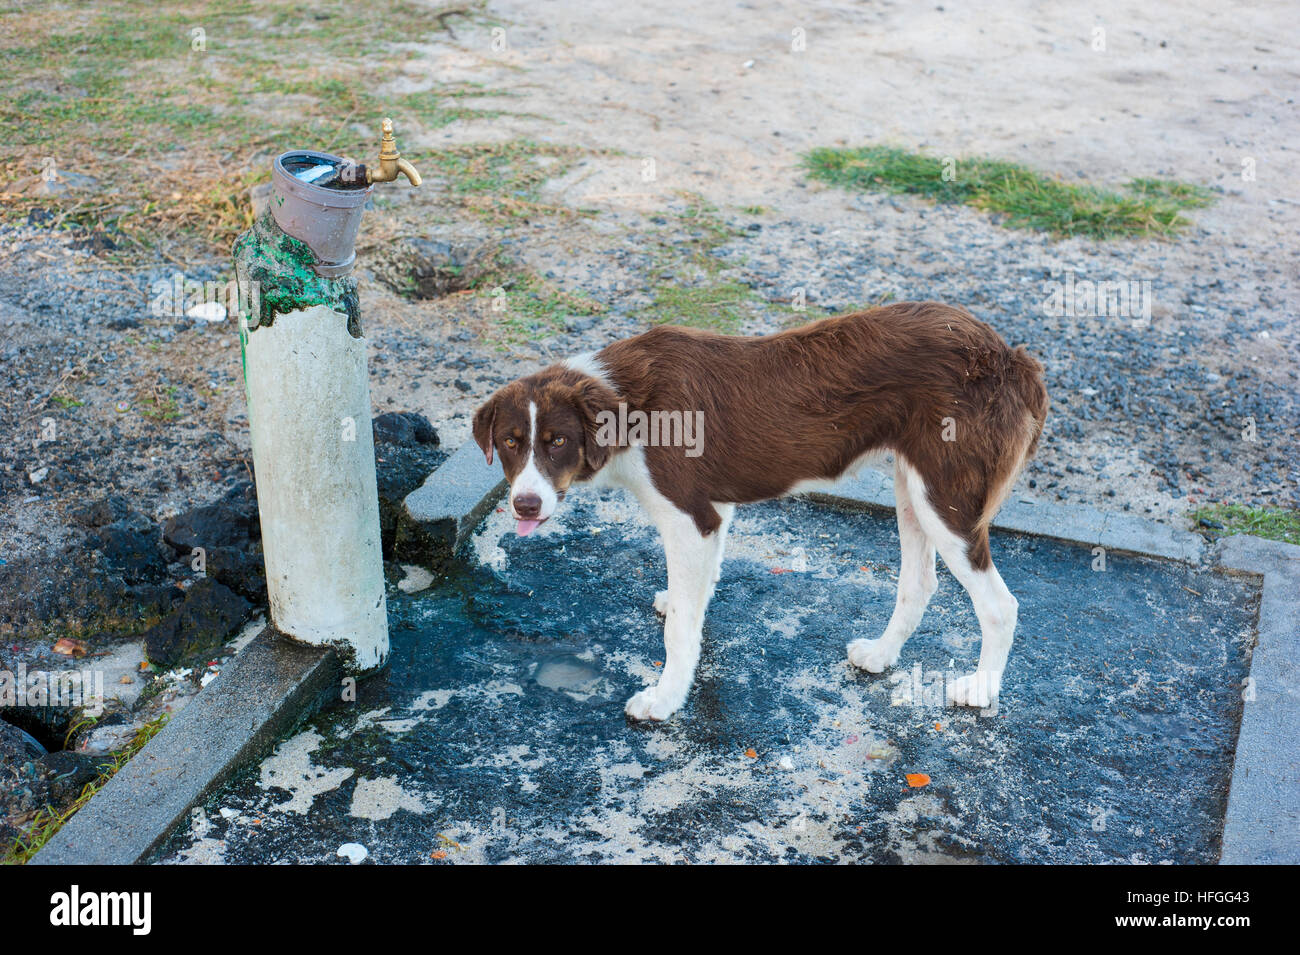 A thirsty dog drinking water from a tap in Mauritius. Stock Photo